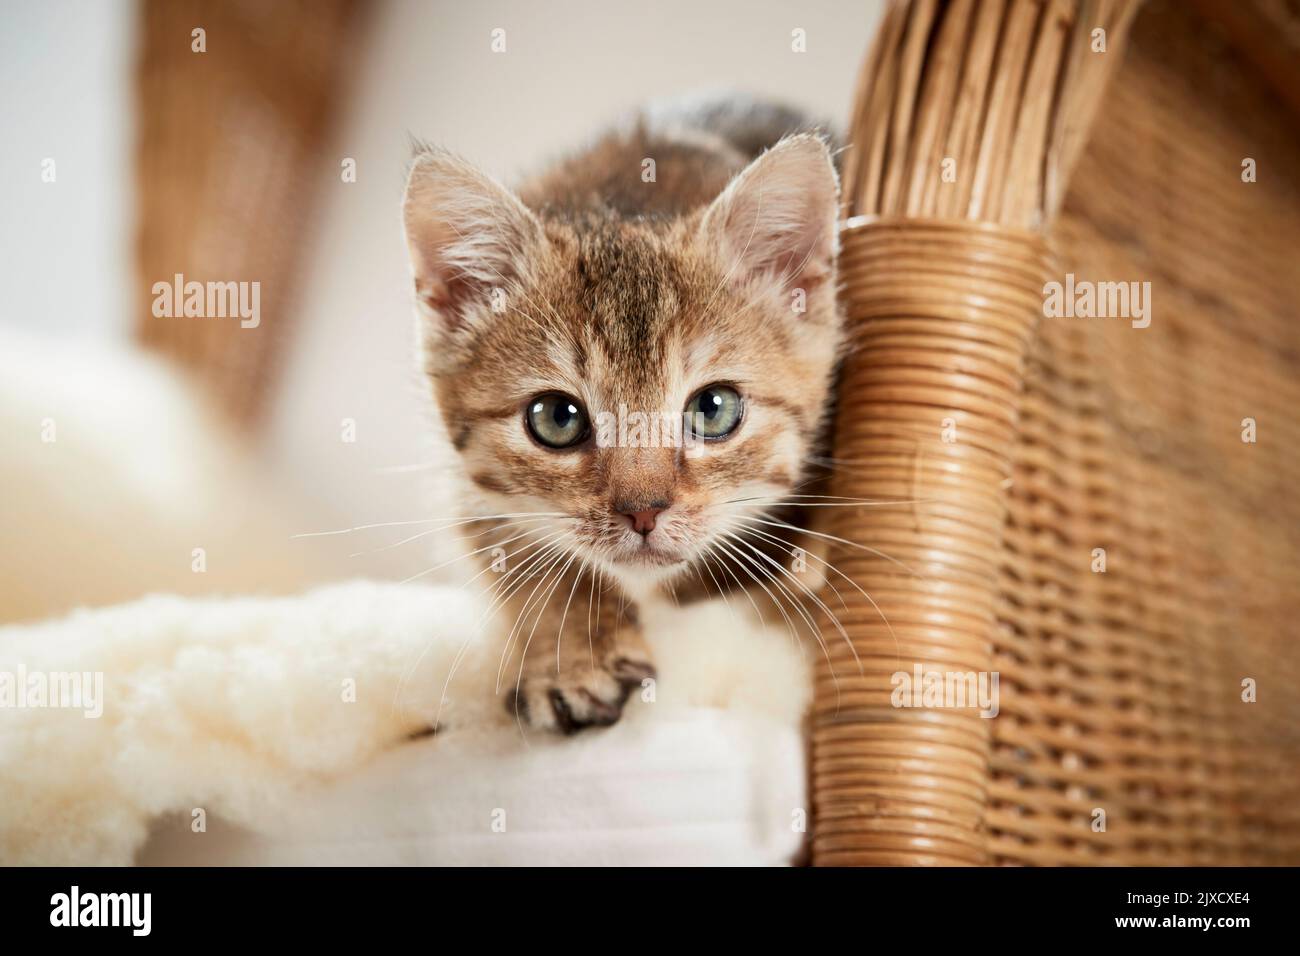 Domestic cat. Domestic cat. A tabby kitten on a wicker chair with lambskin. Germany Stock Photo